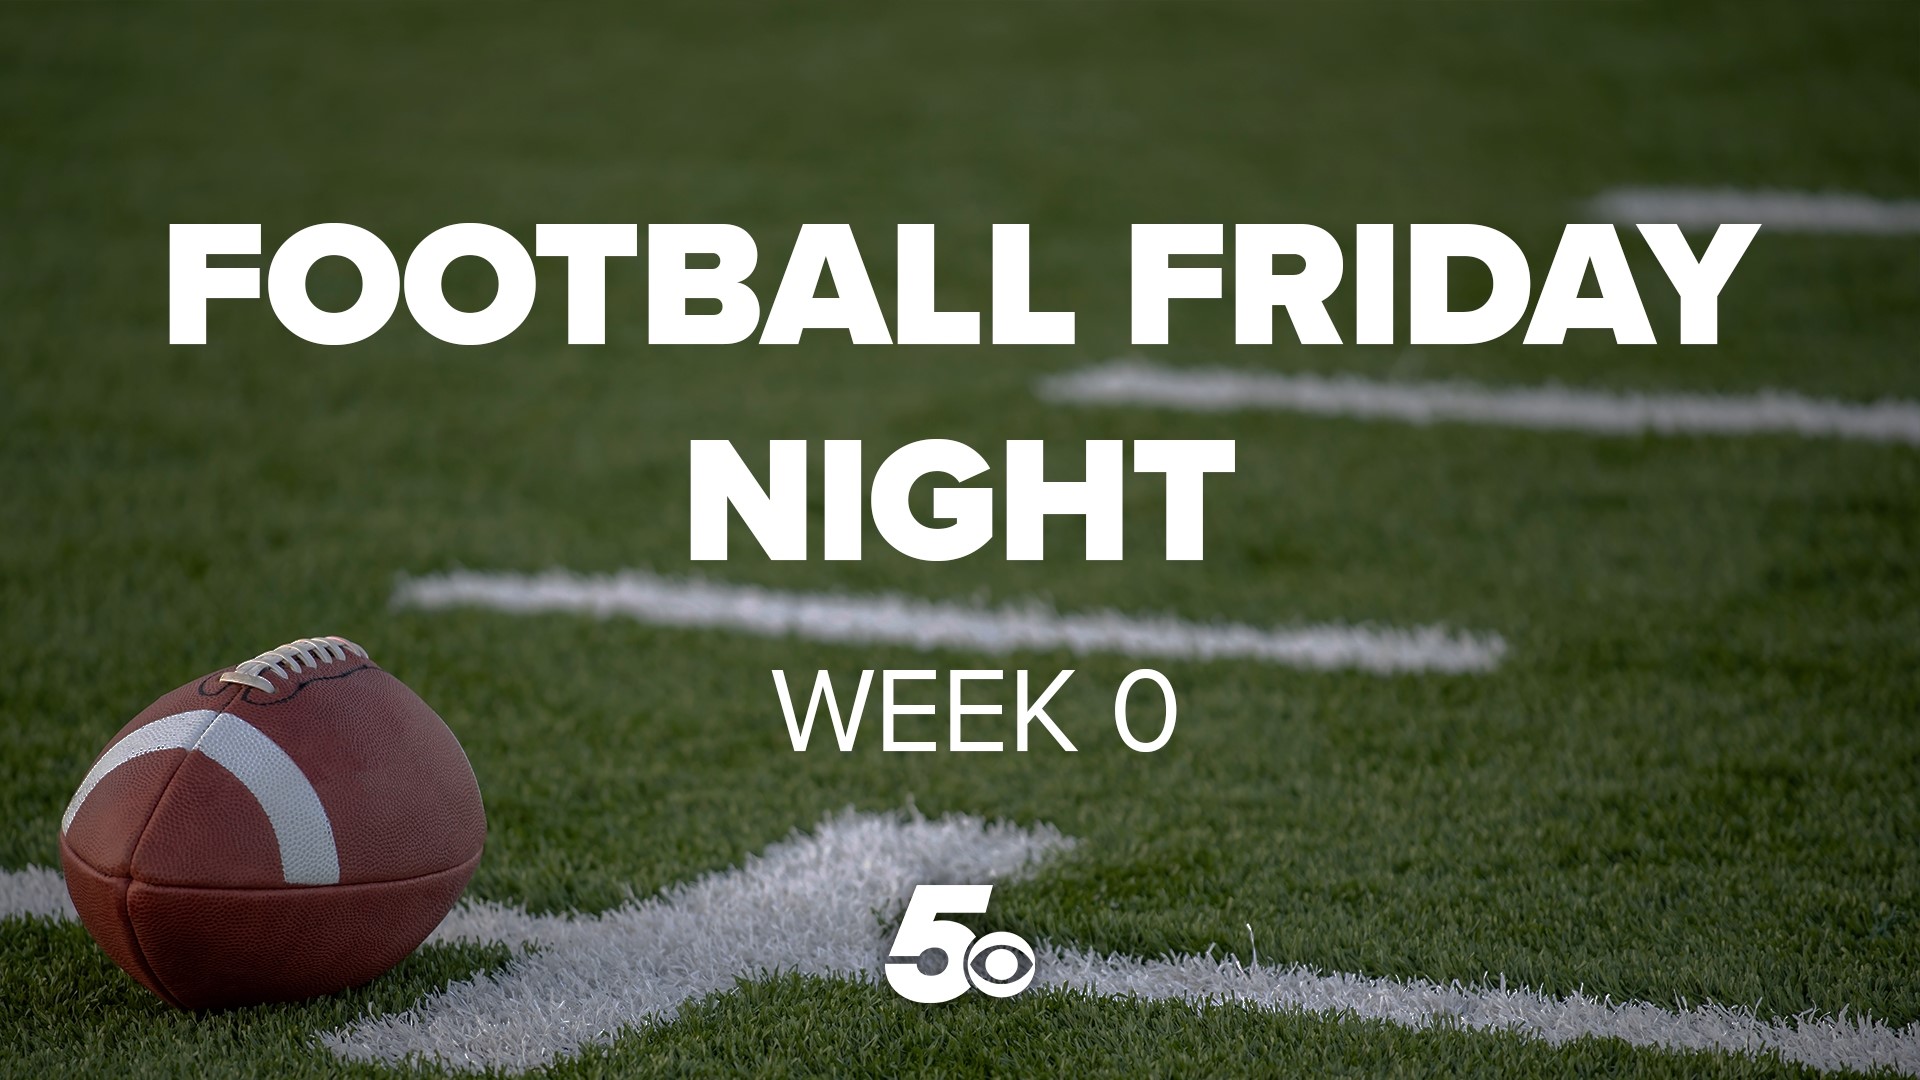 It's the start of another season of Football Friday Night!